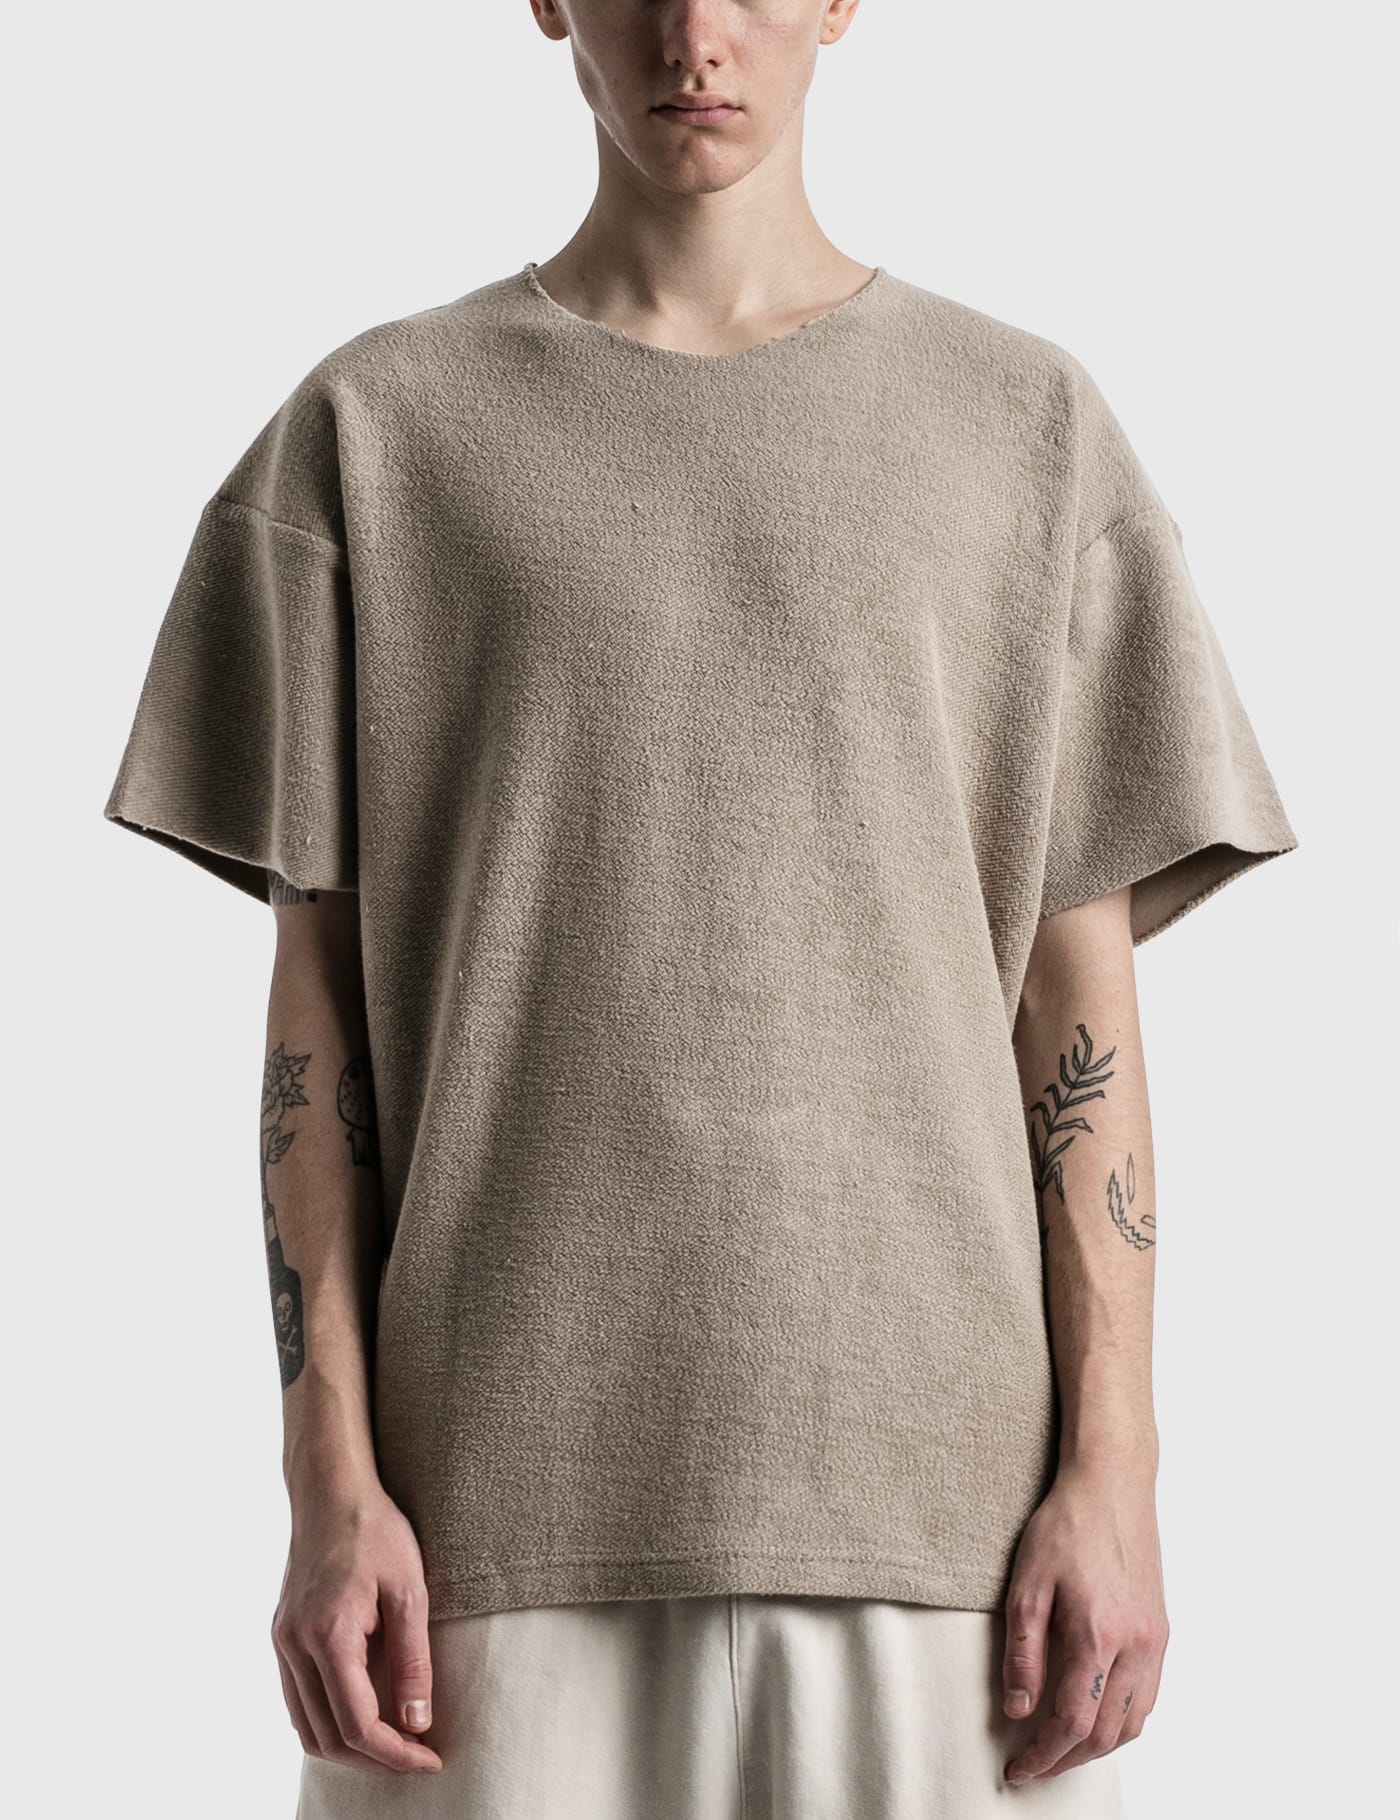 fear of god  inside out  Tシャツ　2枚セット